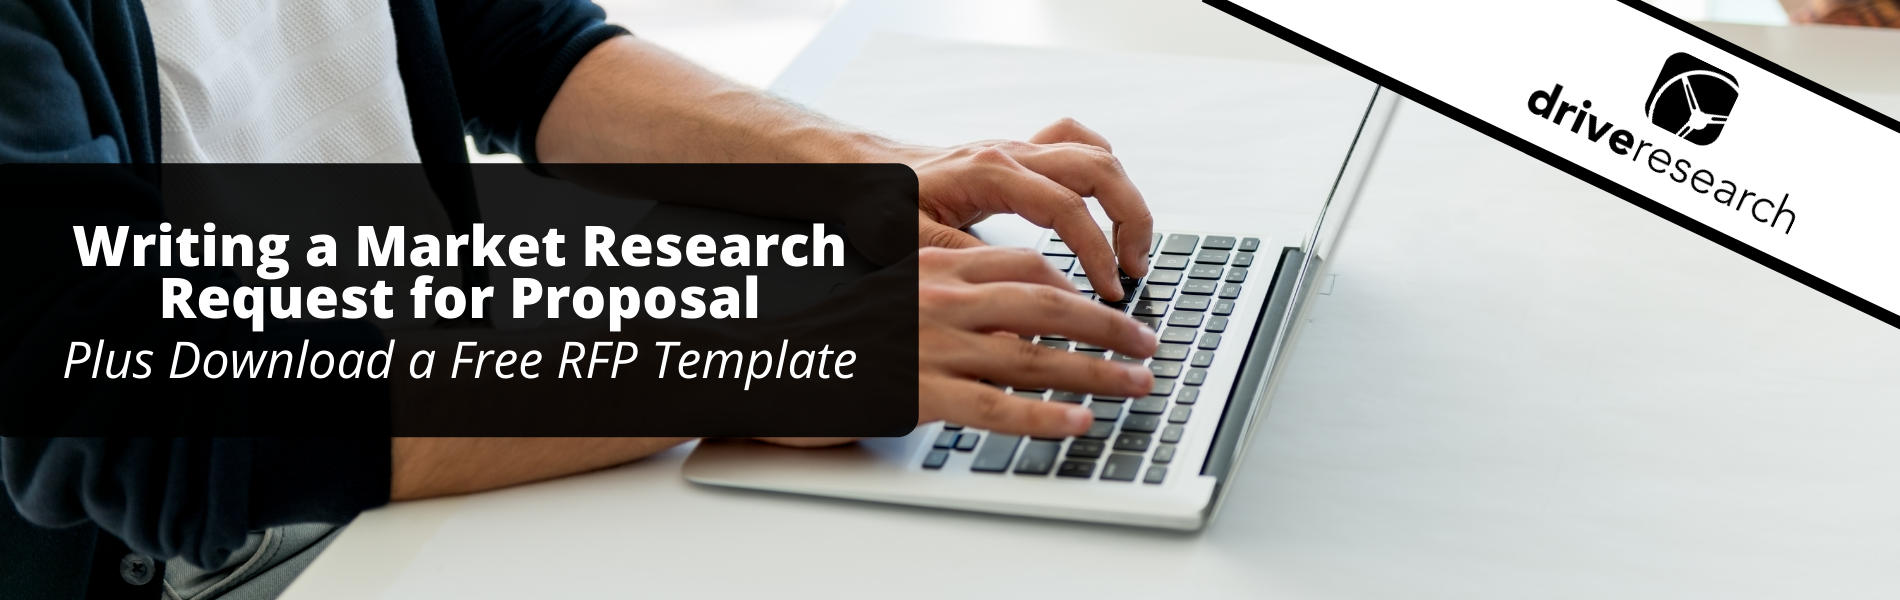 market research request for proposal template